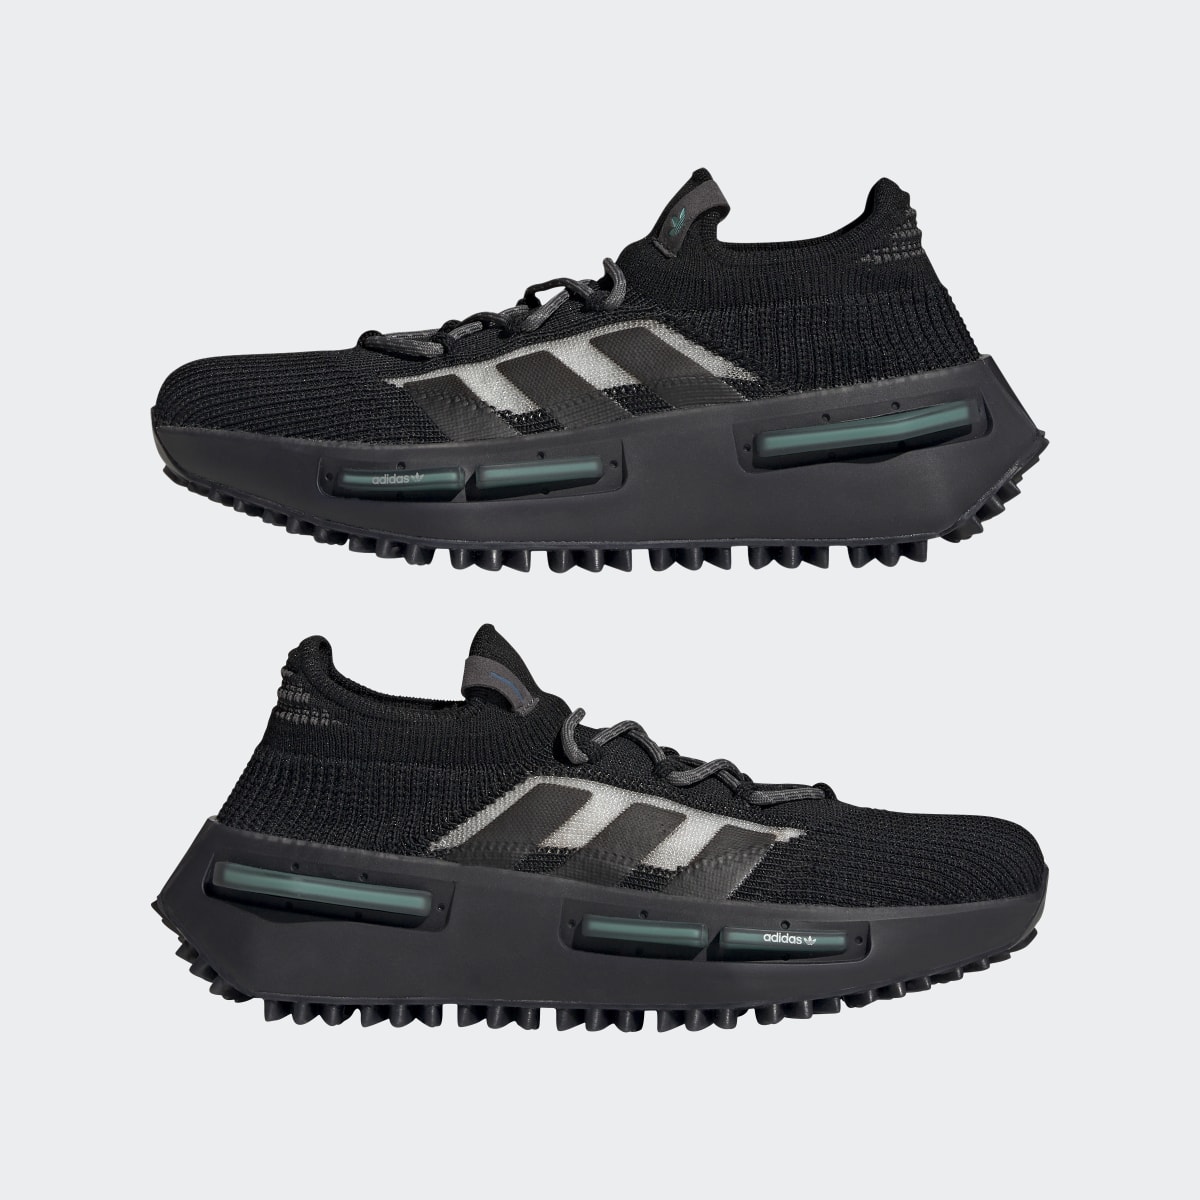 Adidas NMD S1 Shoes. 8